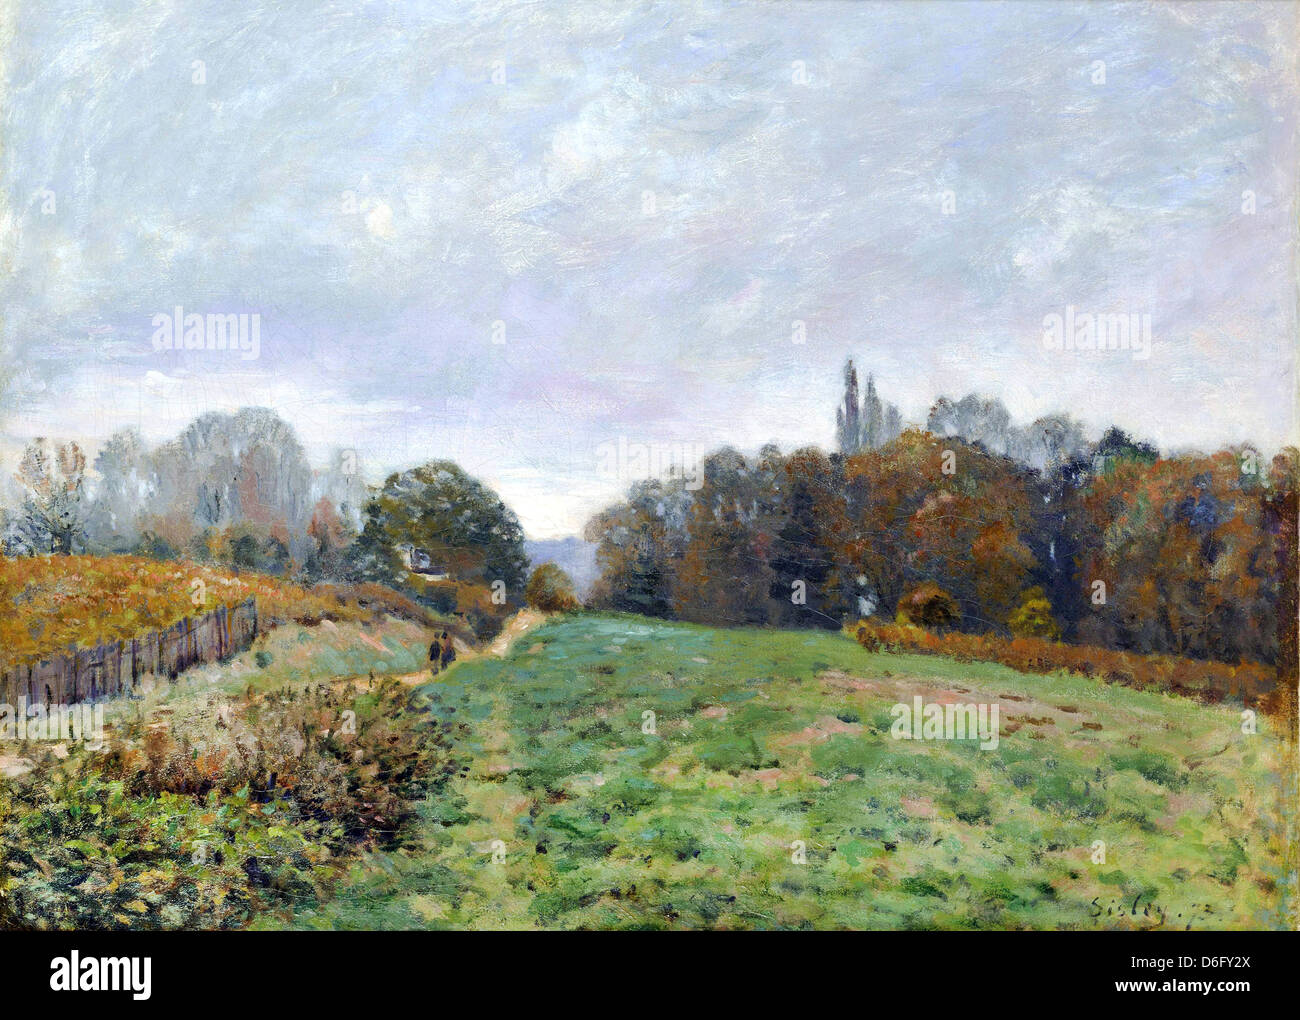 Alfred Sisley, Landscape at Louveciennes 1873 Oil on canvas. National Museum of Western Art, Tokyo Stock Photo